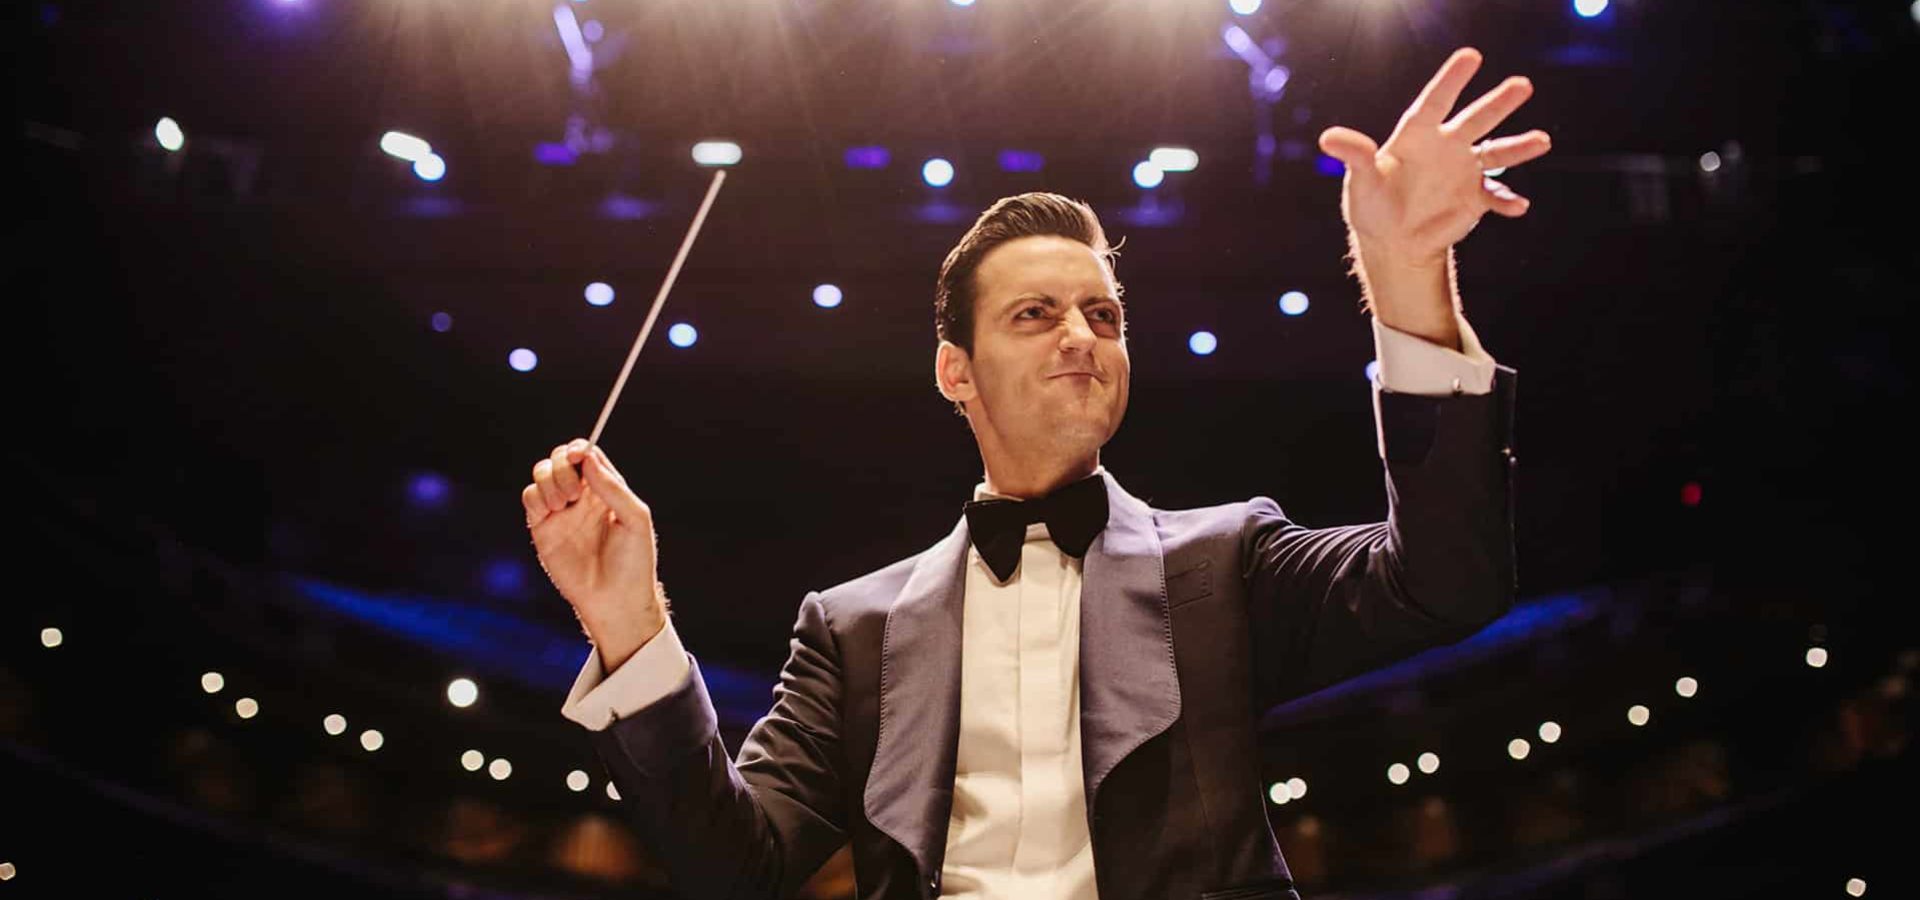 Conductor gestures at orchestra with left hand while holding baton in the right